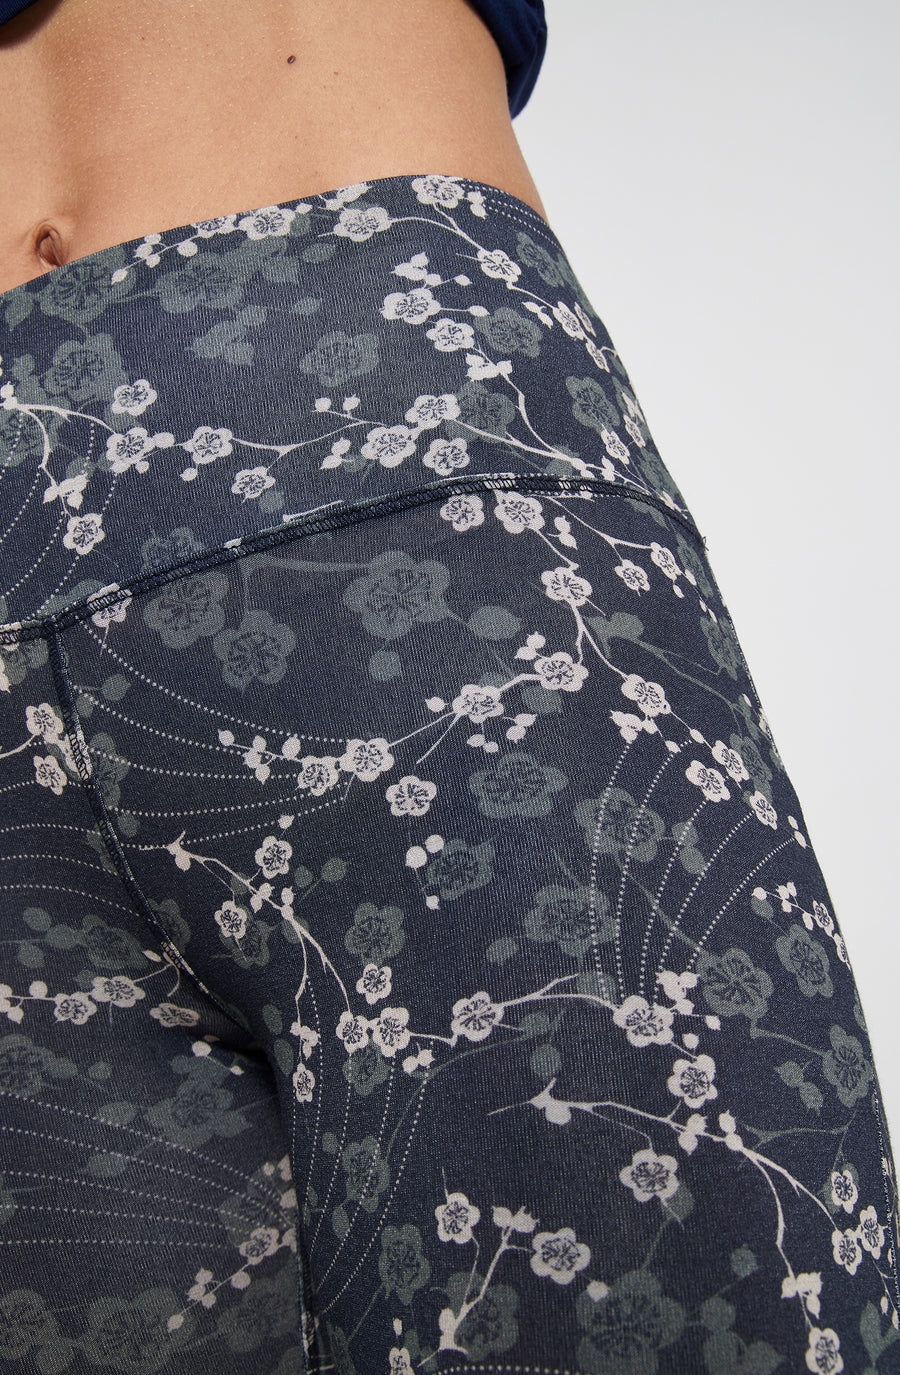 Flow With It Leggings - Japanese Floral